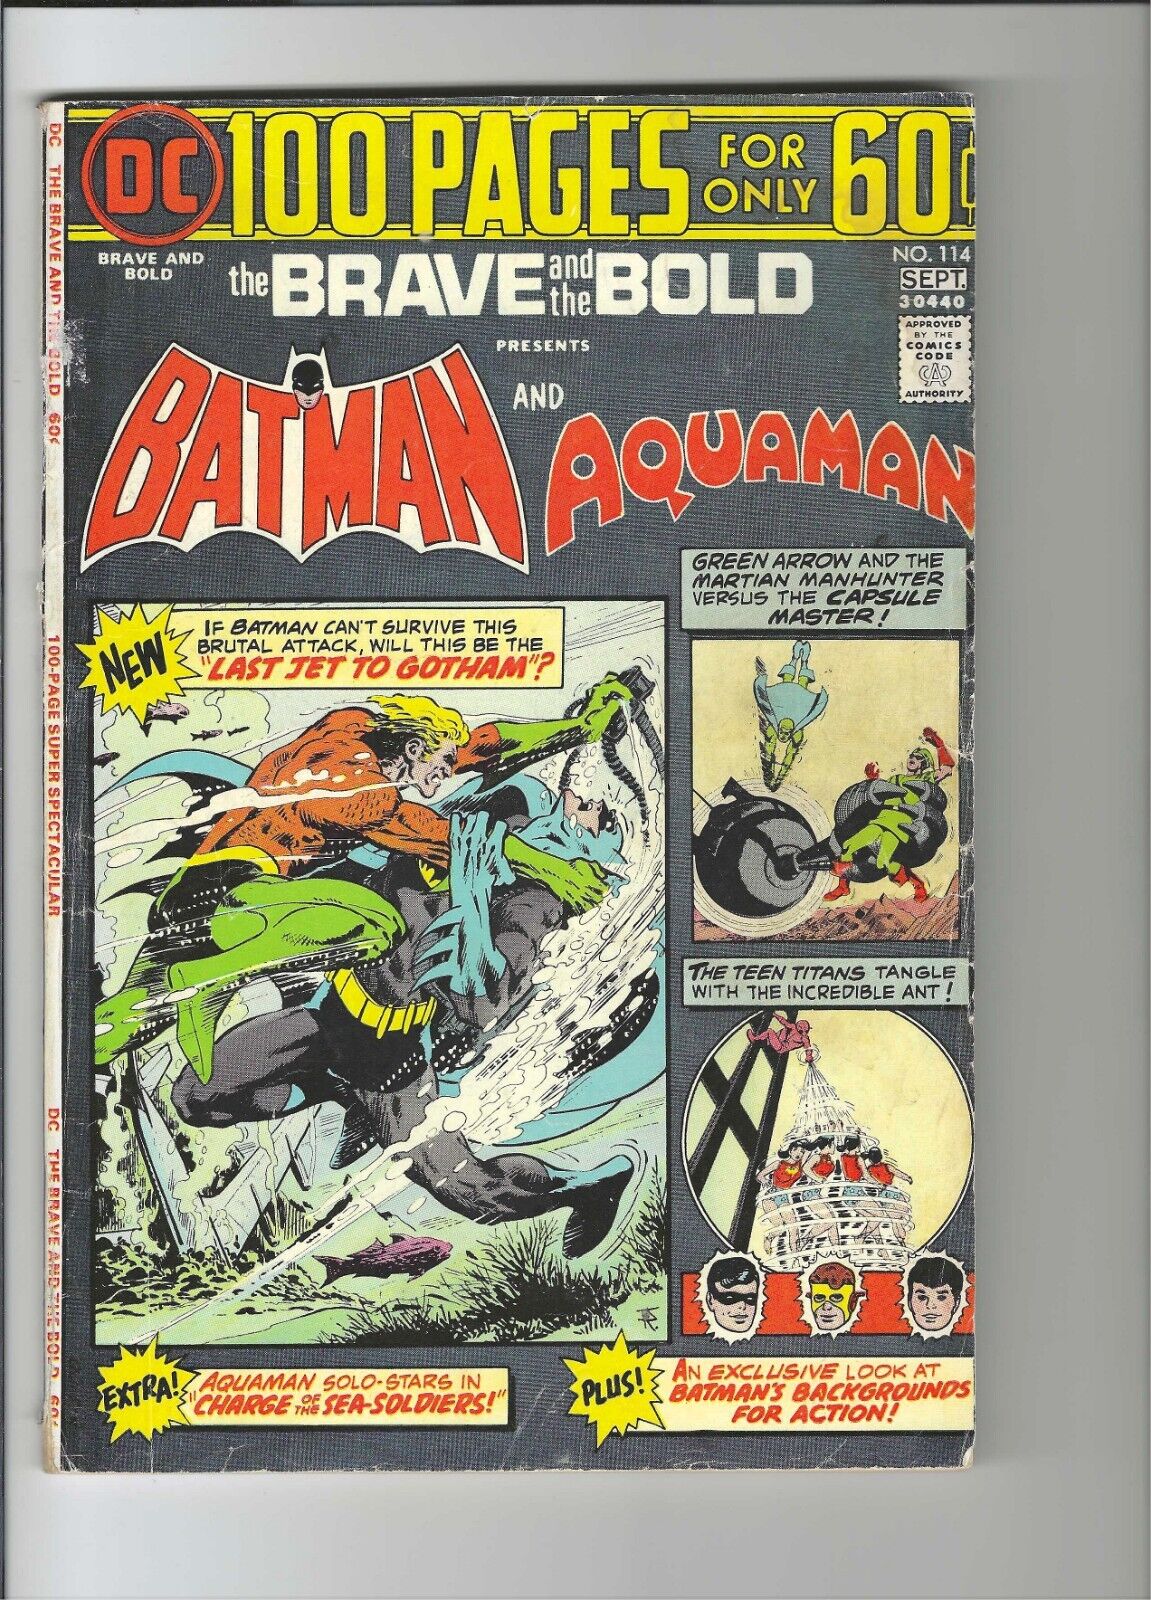 The Brave and the Bold #114: Dry Cleaned: Pressed: Bagged: Boarded VG-FN 5.0